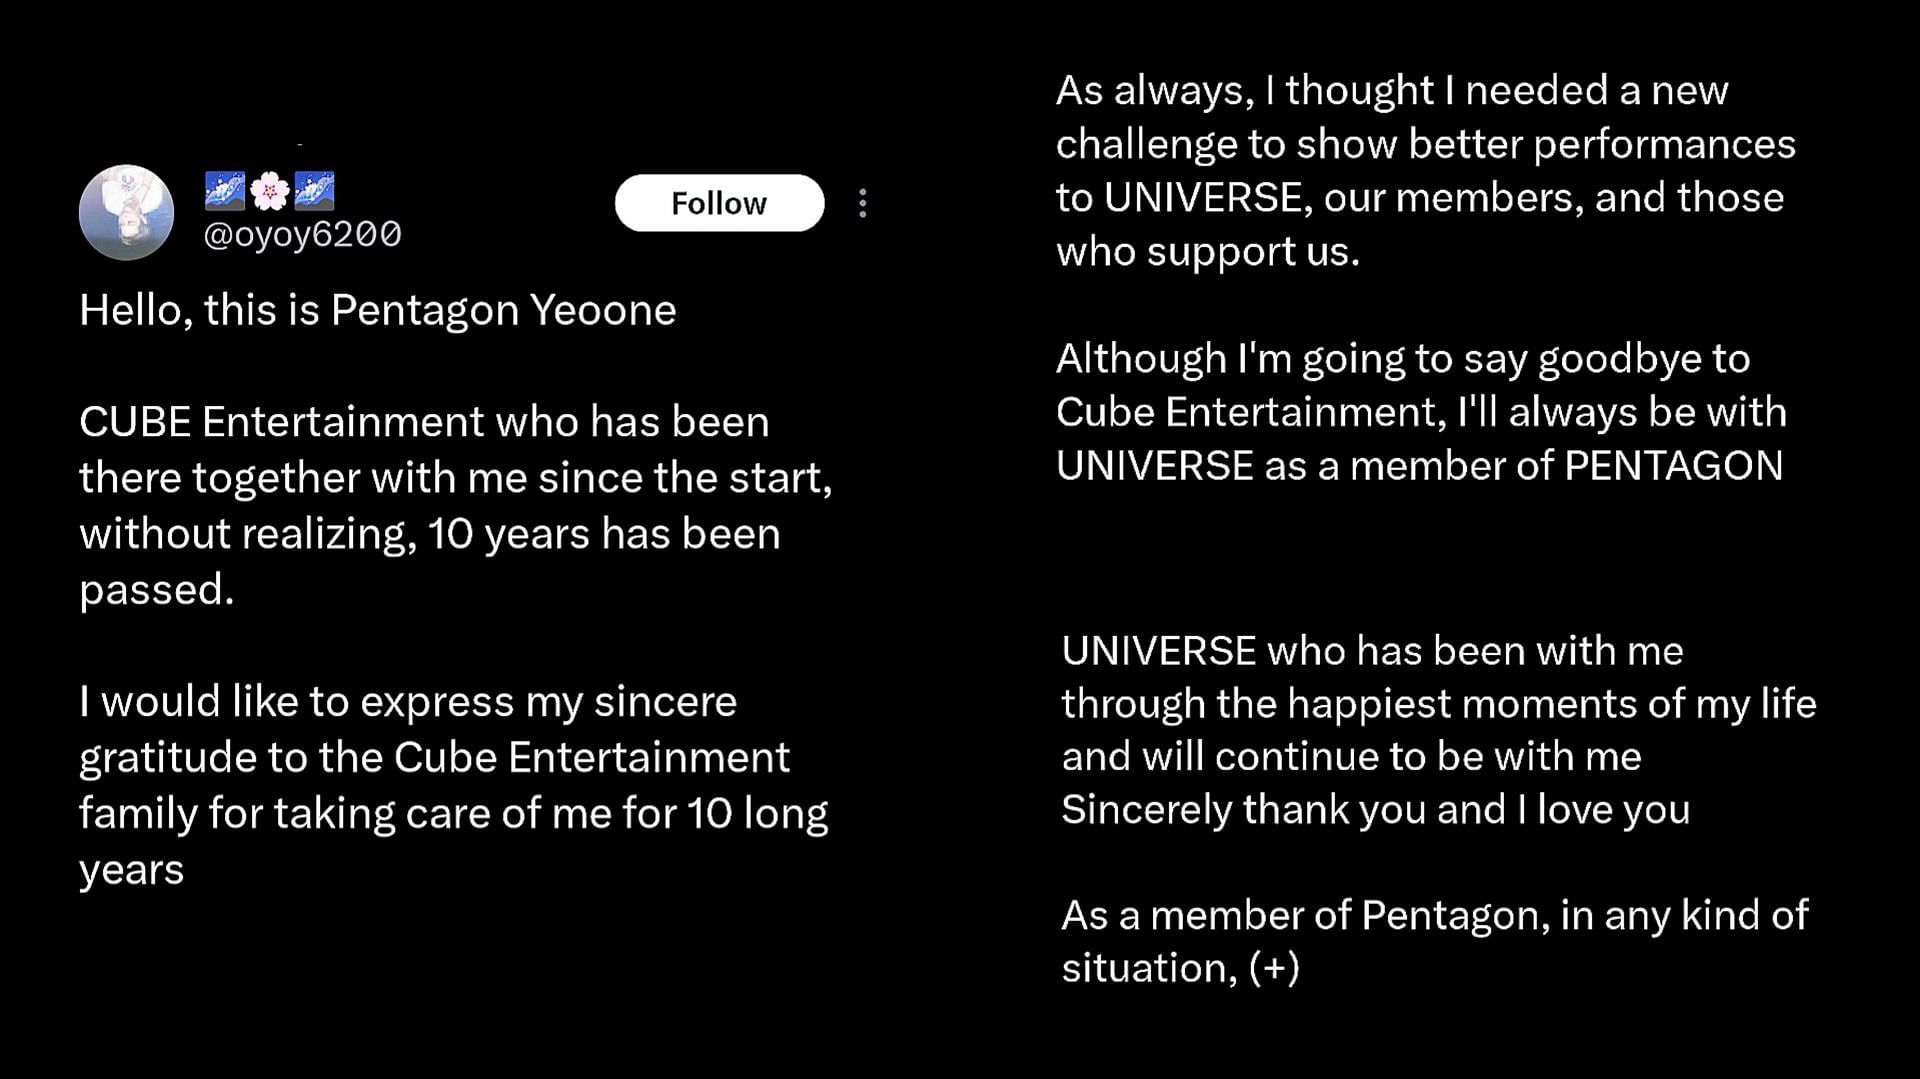 Translation for Yeon One&#039;s statement (Image via X)